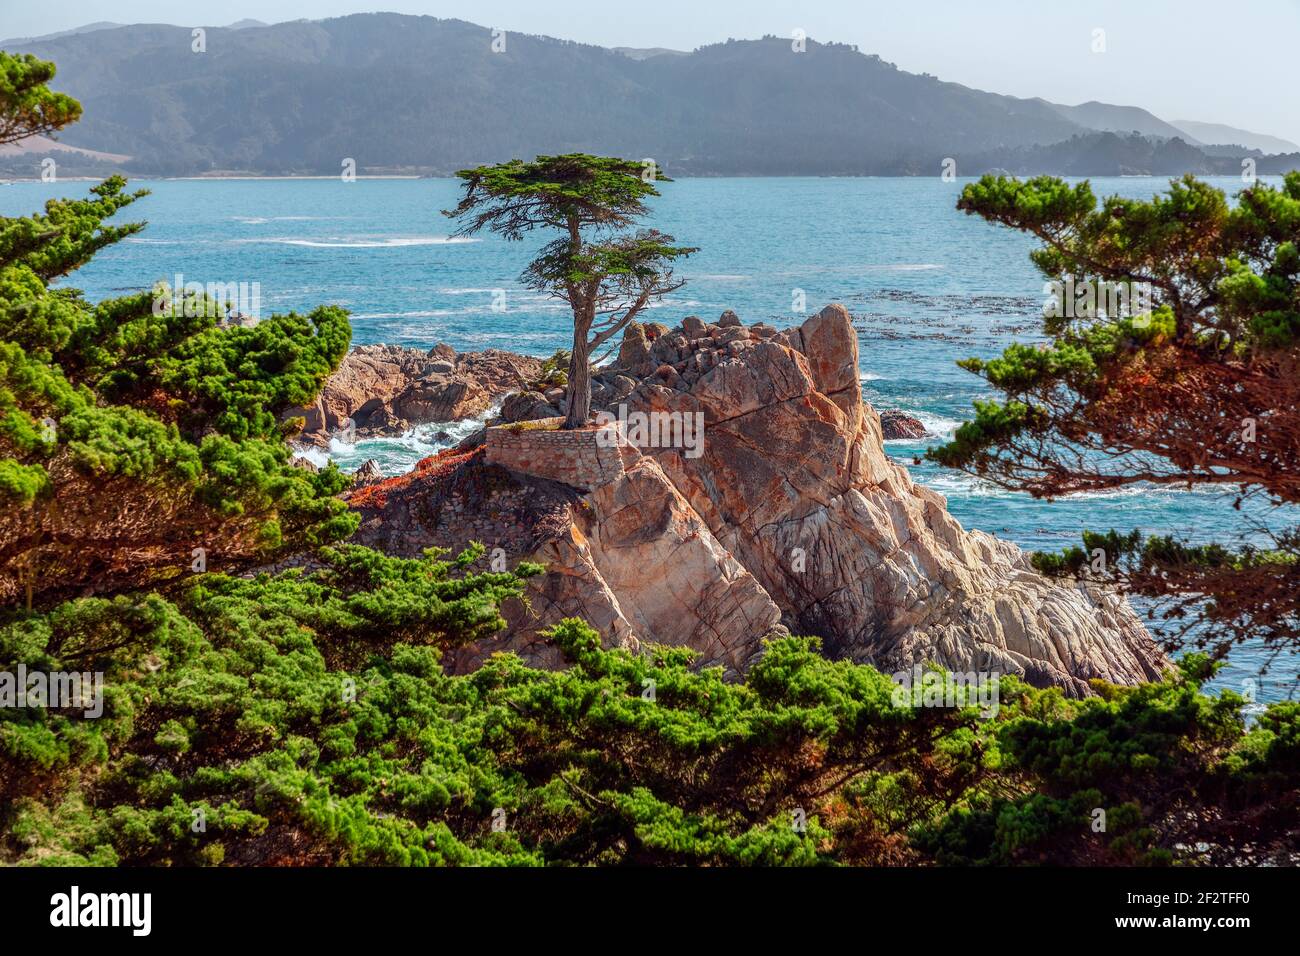 Beautiful lone Cypress tree (Monterey cypress) on 17-mile drive. The tree is a Western icon, and has been called one of the most photographed trees in Stock Photo